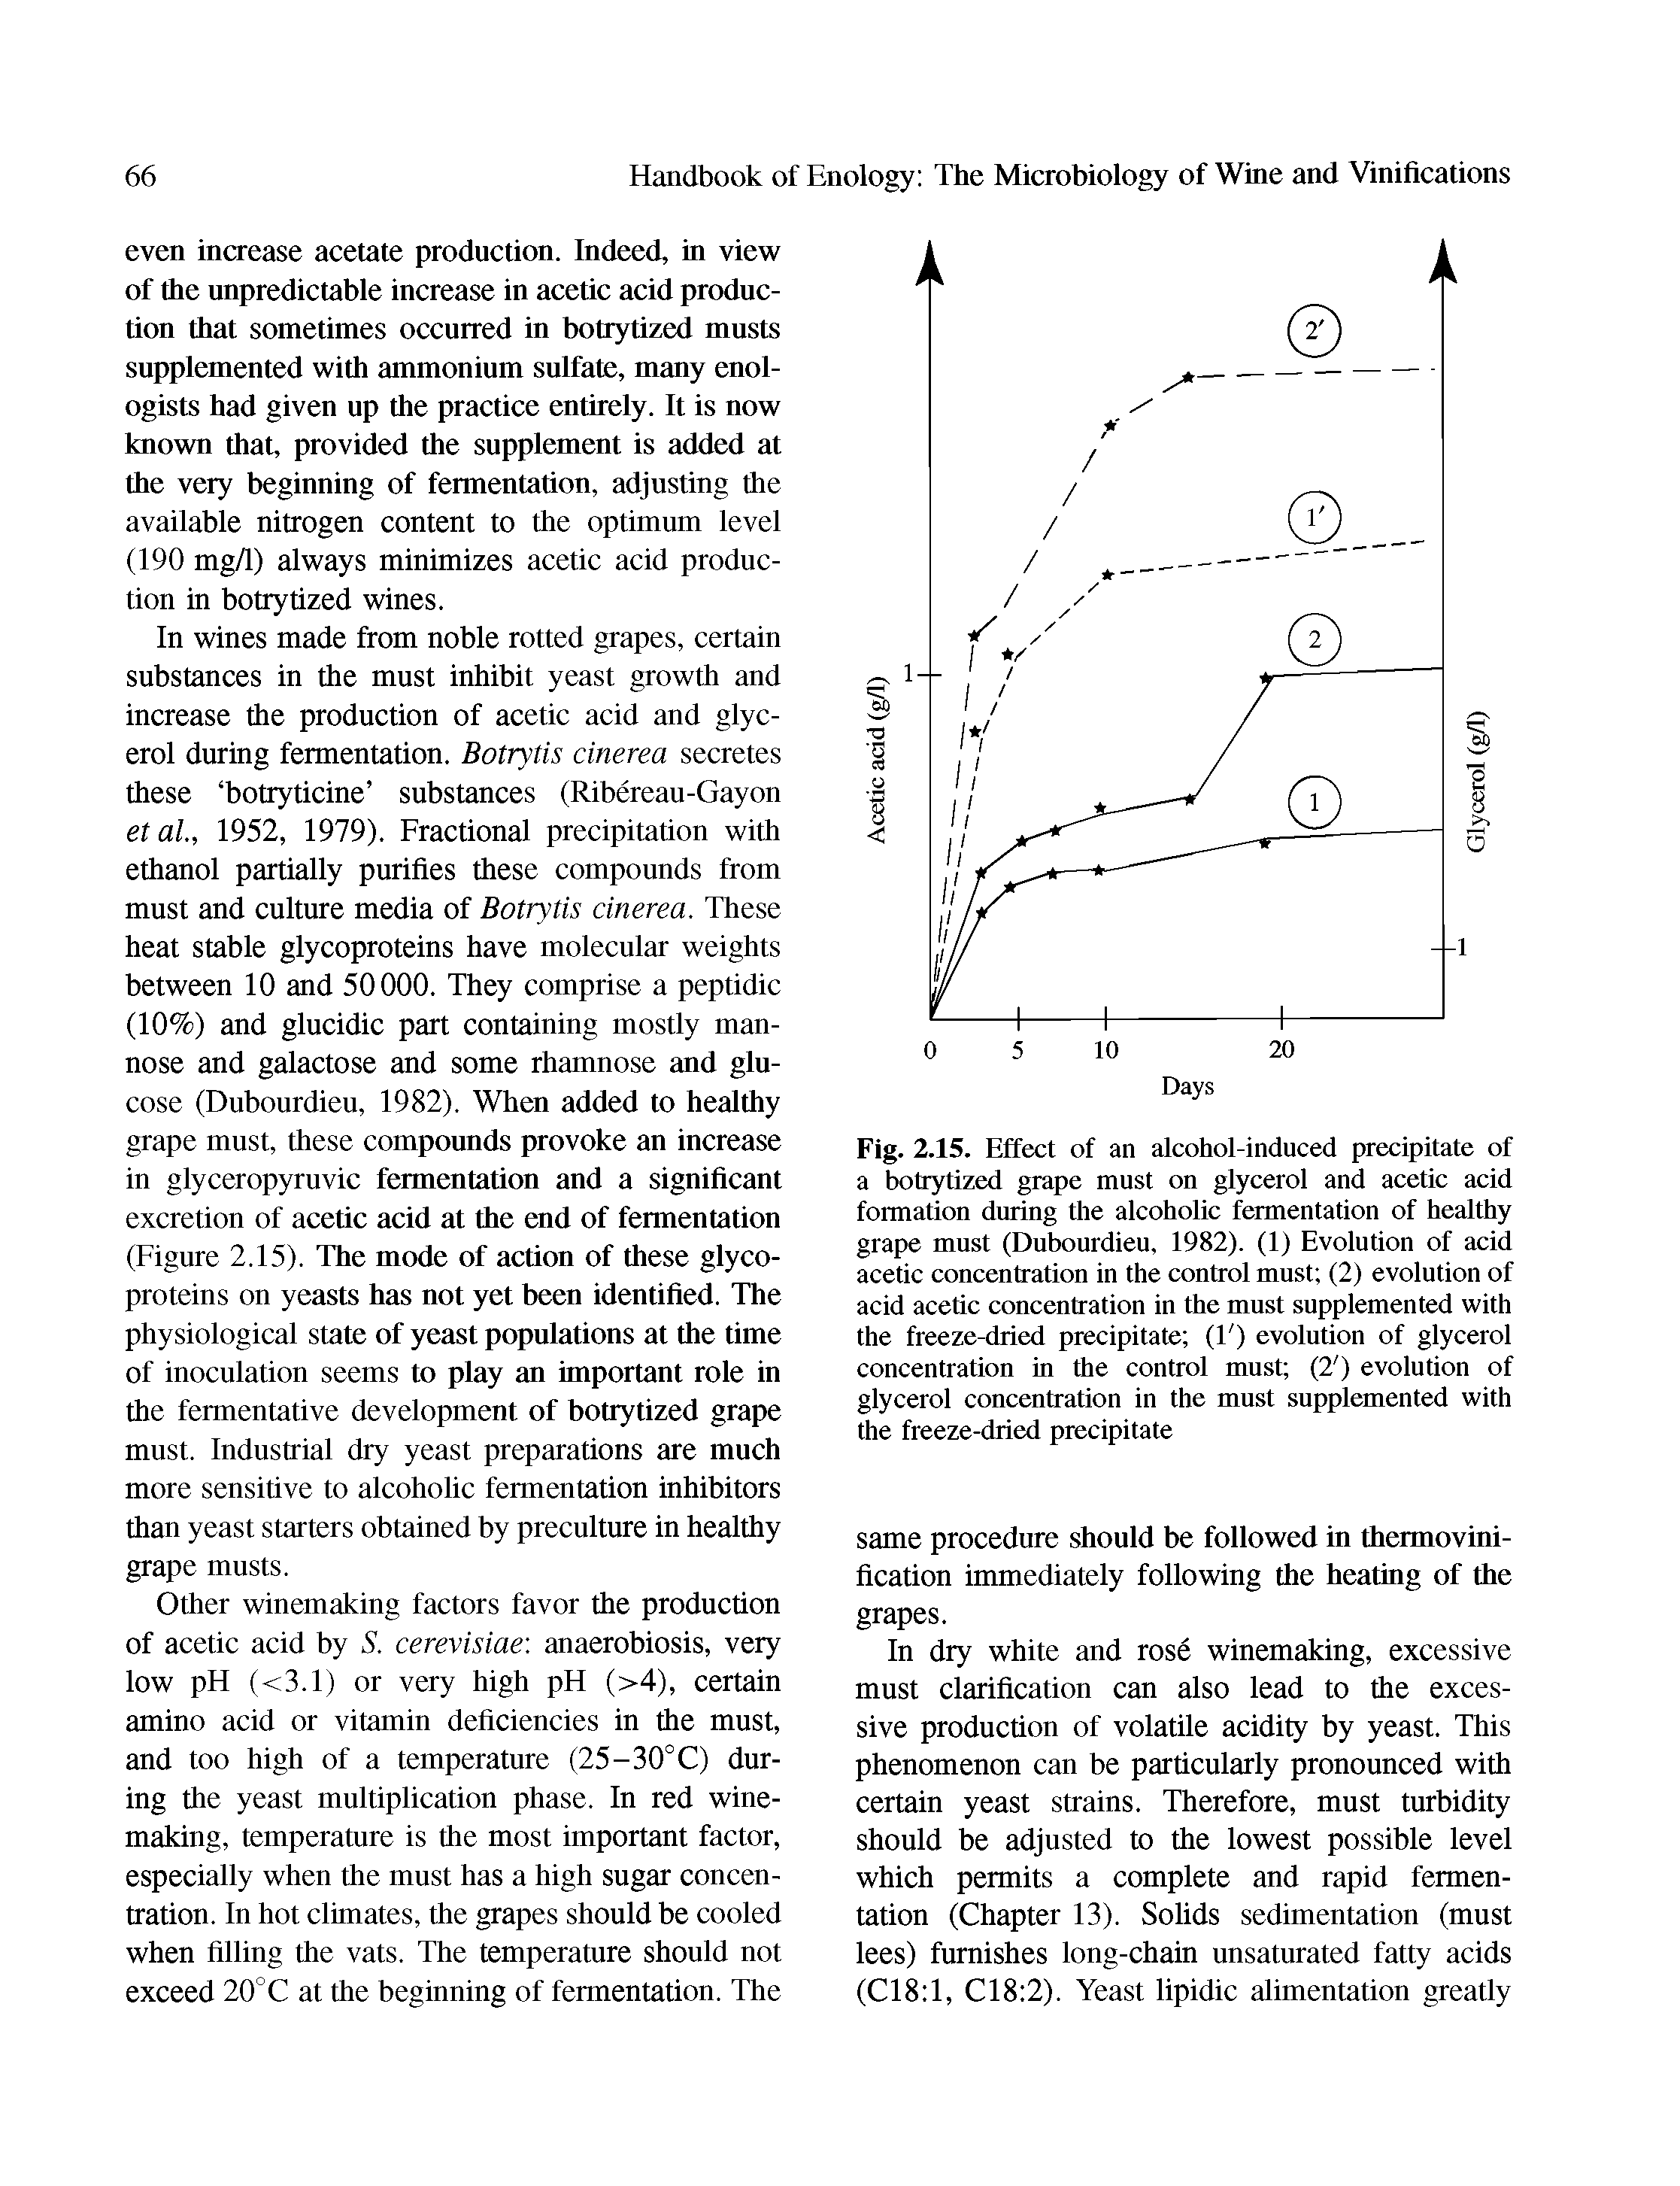 Fig. 2.15. Effect of an alcohol-induced precipitate of a botrytized grape must on glycerol and acetic acid formation during the alcoholic fermentation of healthy grape must (Dubourdieu, 1982). (1) Evolution of acid acetic concentration in the control must (2) evolution of acid acetic concentration in the must supplemented with the freeze-dried precipitate (1 ) evolution of glycerol concentration in the control must (2 ) evolution of glycerol concentration in the must supplemented with the freeze-dried precipitate...